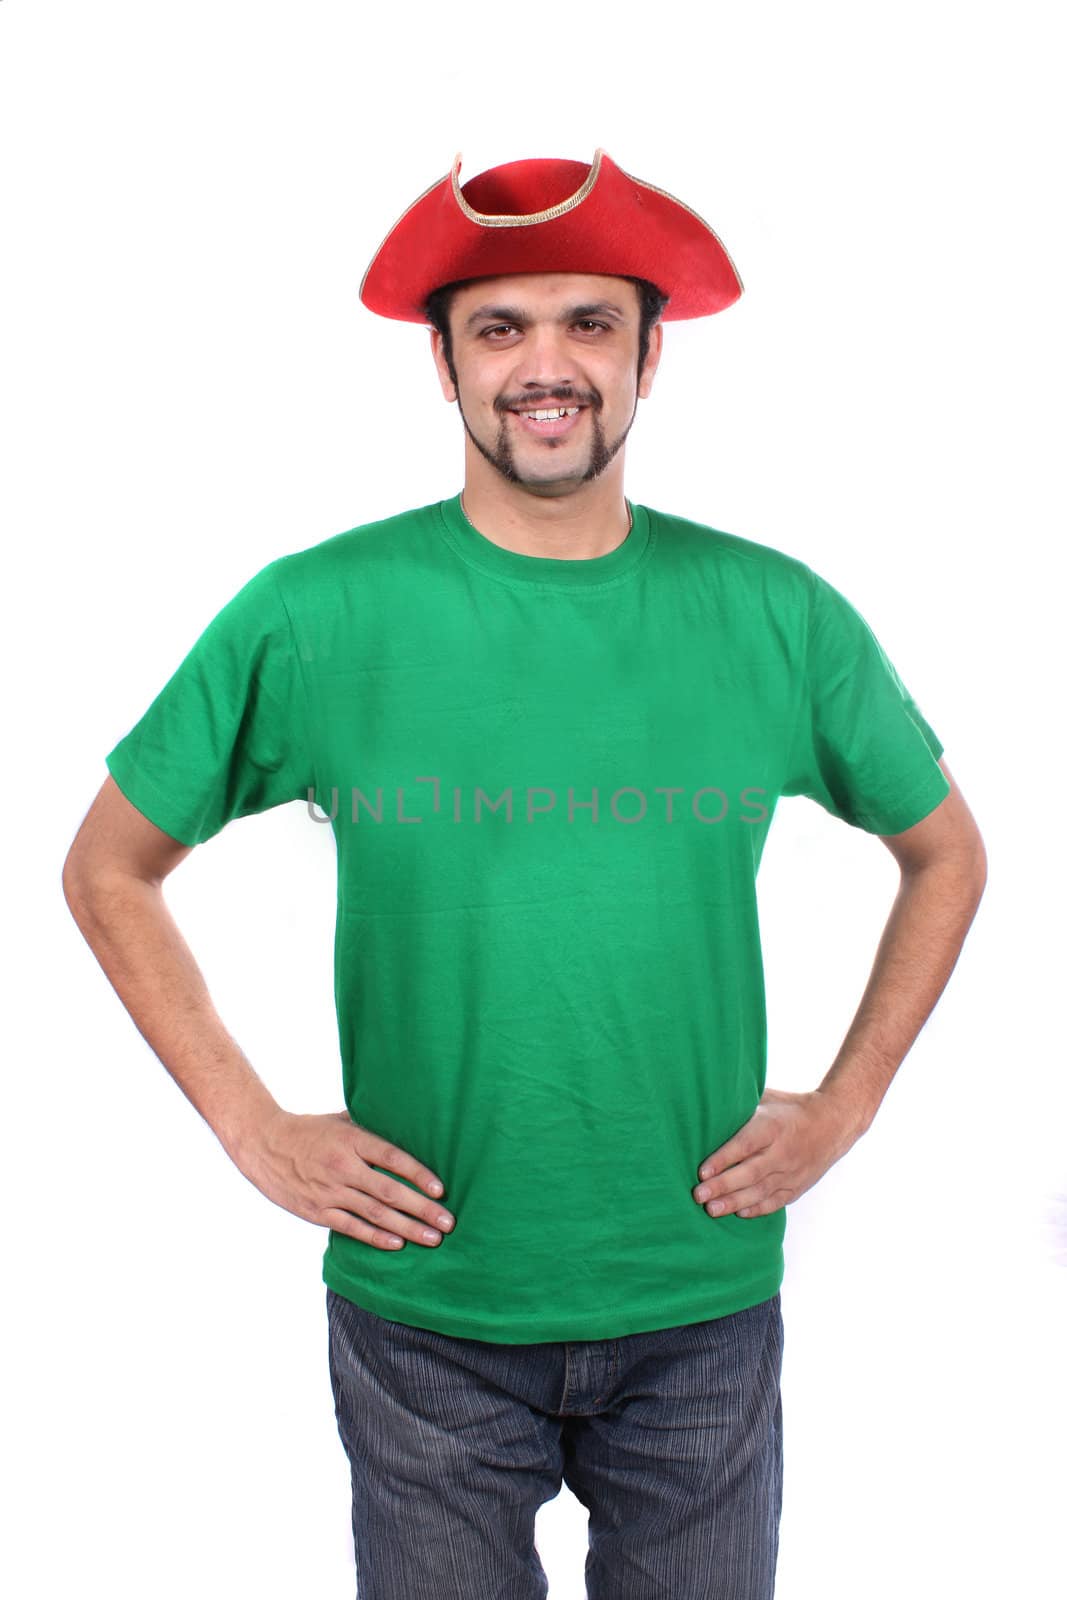 A young Indian guy wearing a red ship captain hat, on white studio background.